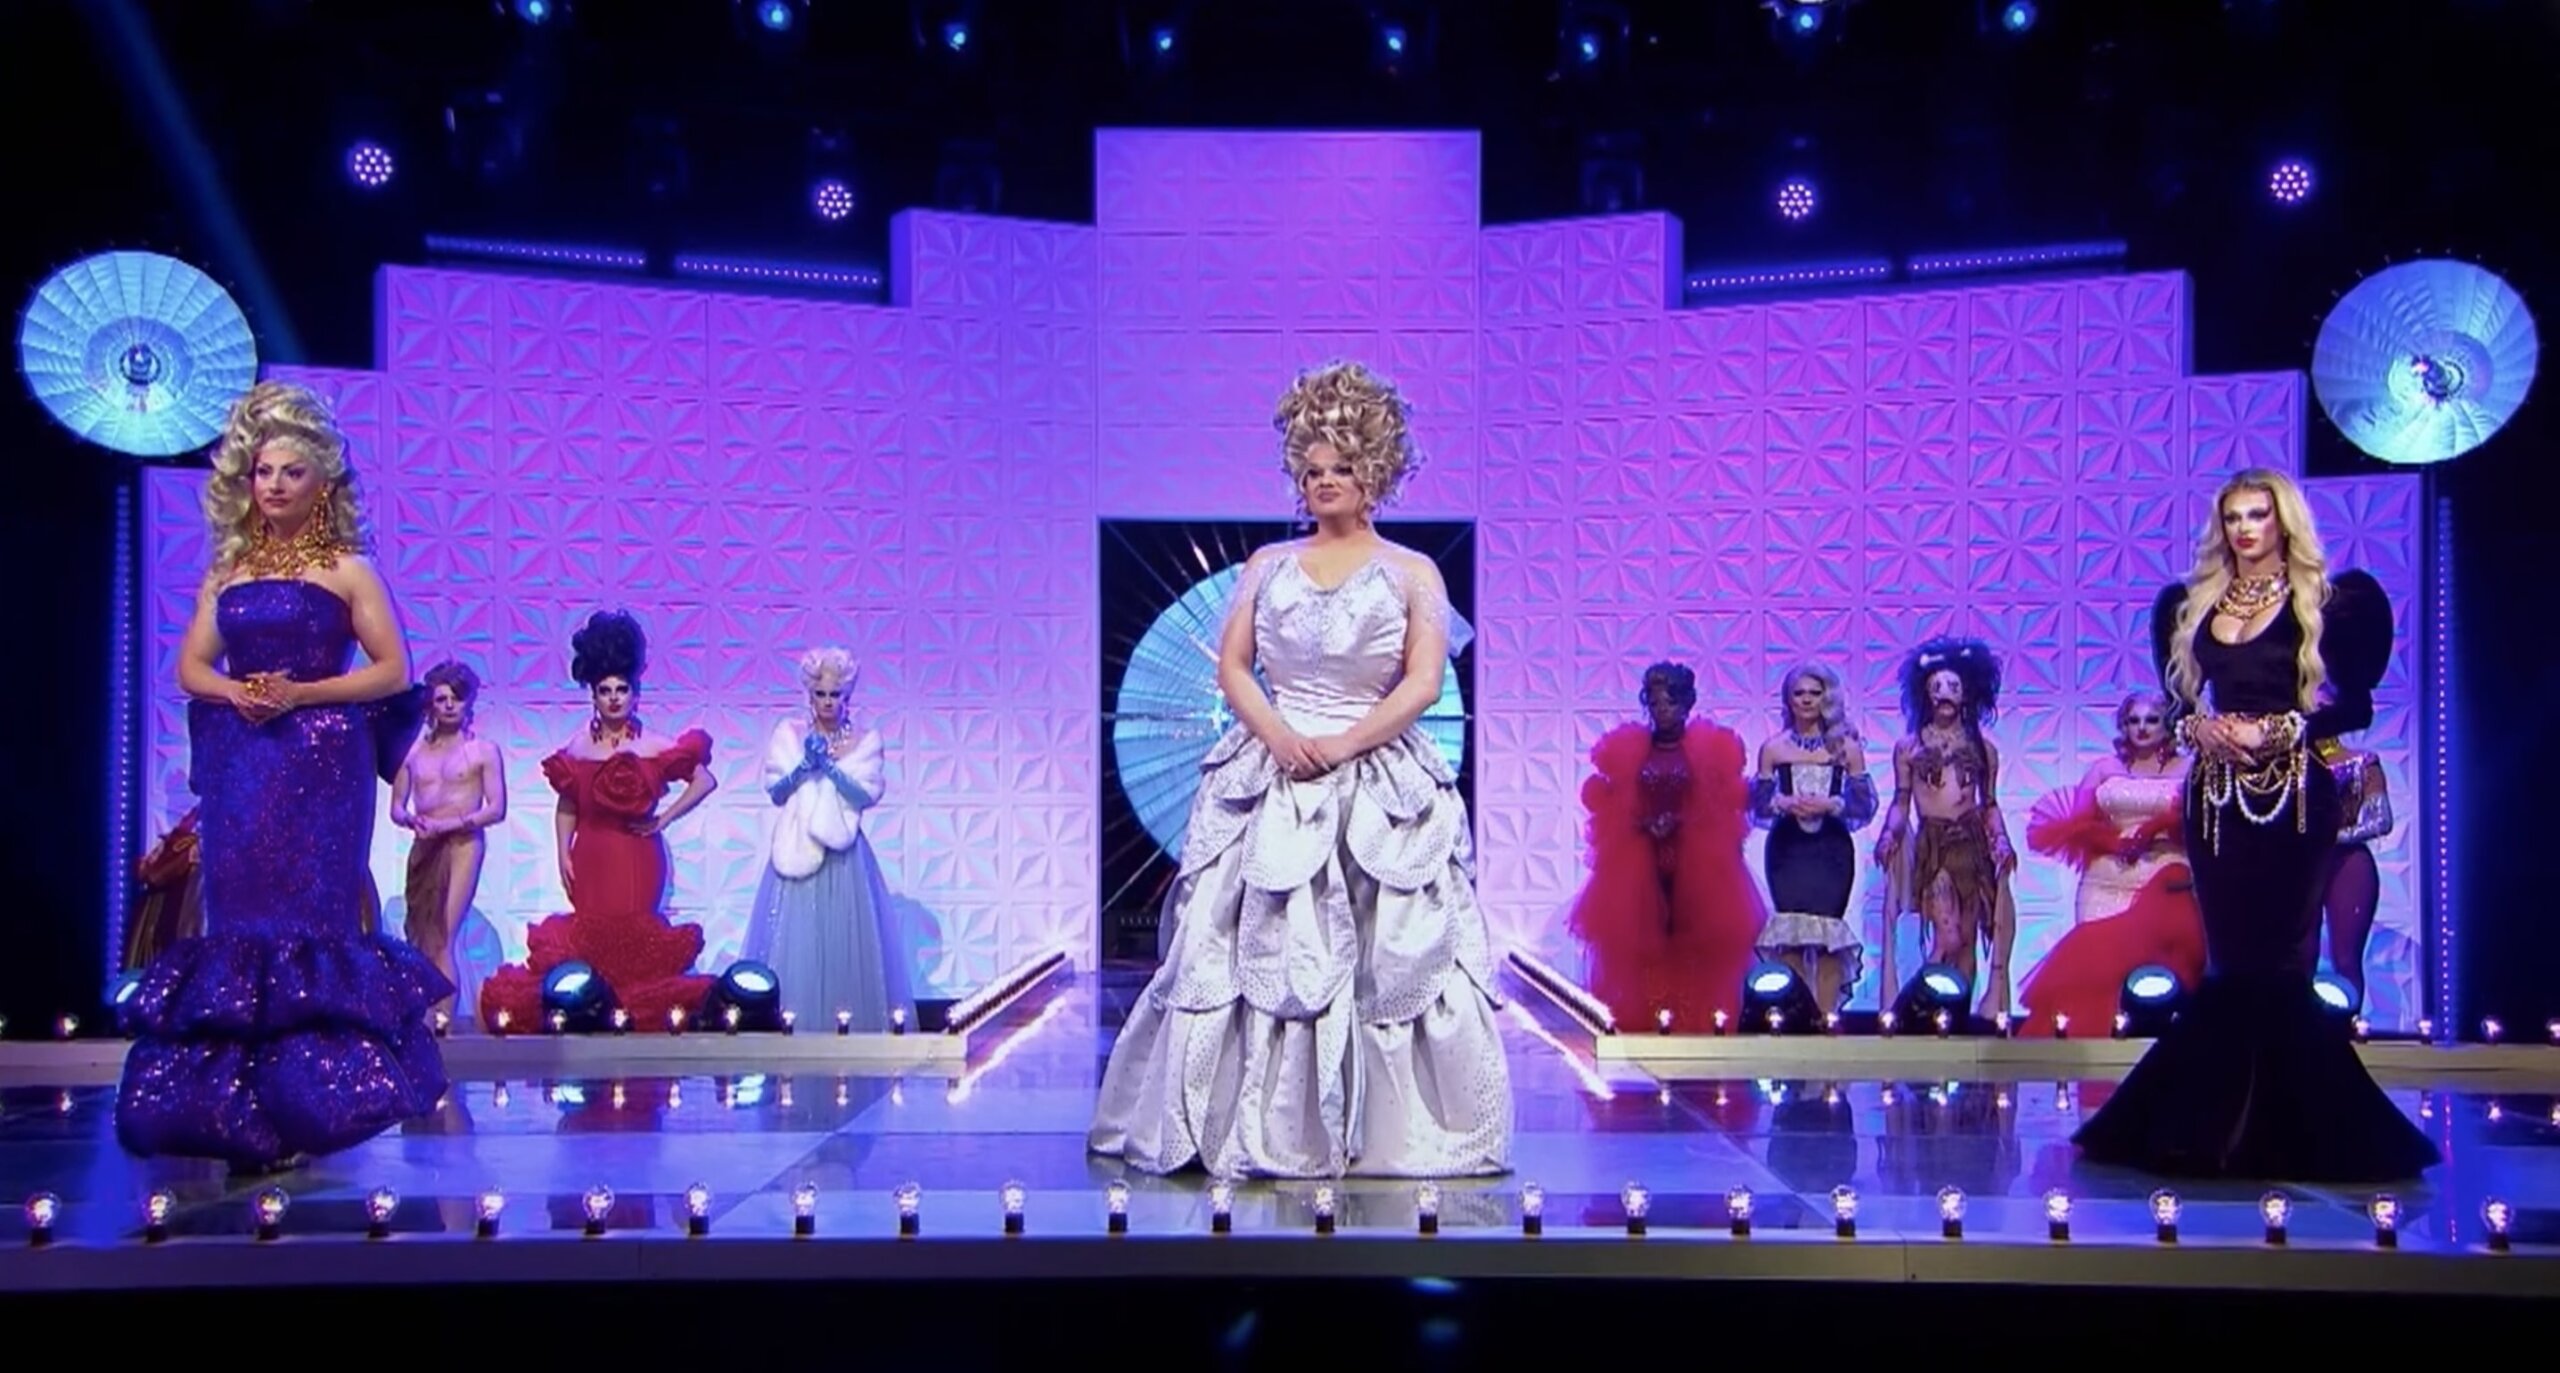 Ella Vaday, Kitty Scott-Claus and Krystal Versace on the finale of RuPaul's Drag Race UK 3